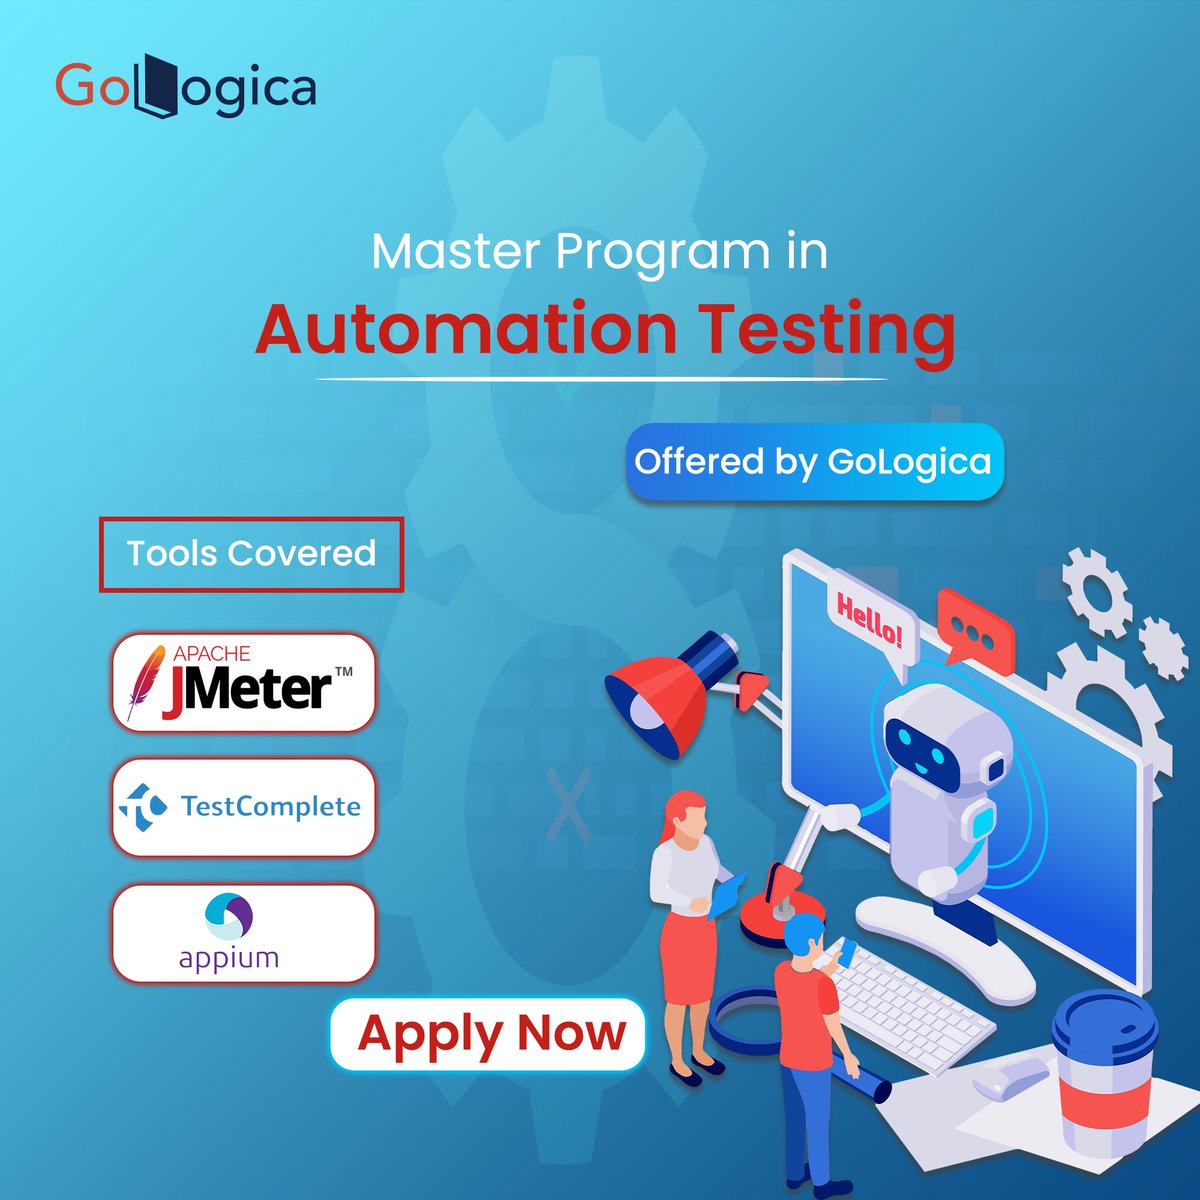 Master the art of automation testing with GoLogica comprehensive program! 

#Automationtesting #JMeter #TestComplete #SoftwareTesting #GoLogica #MasterProgram #ITCareers #student #course #ittraining #apache #testing #career #freedemo #classes #online